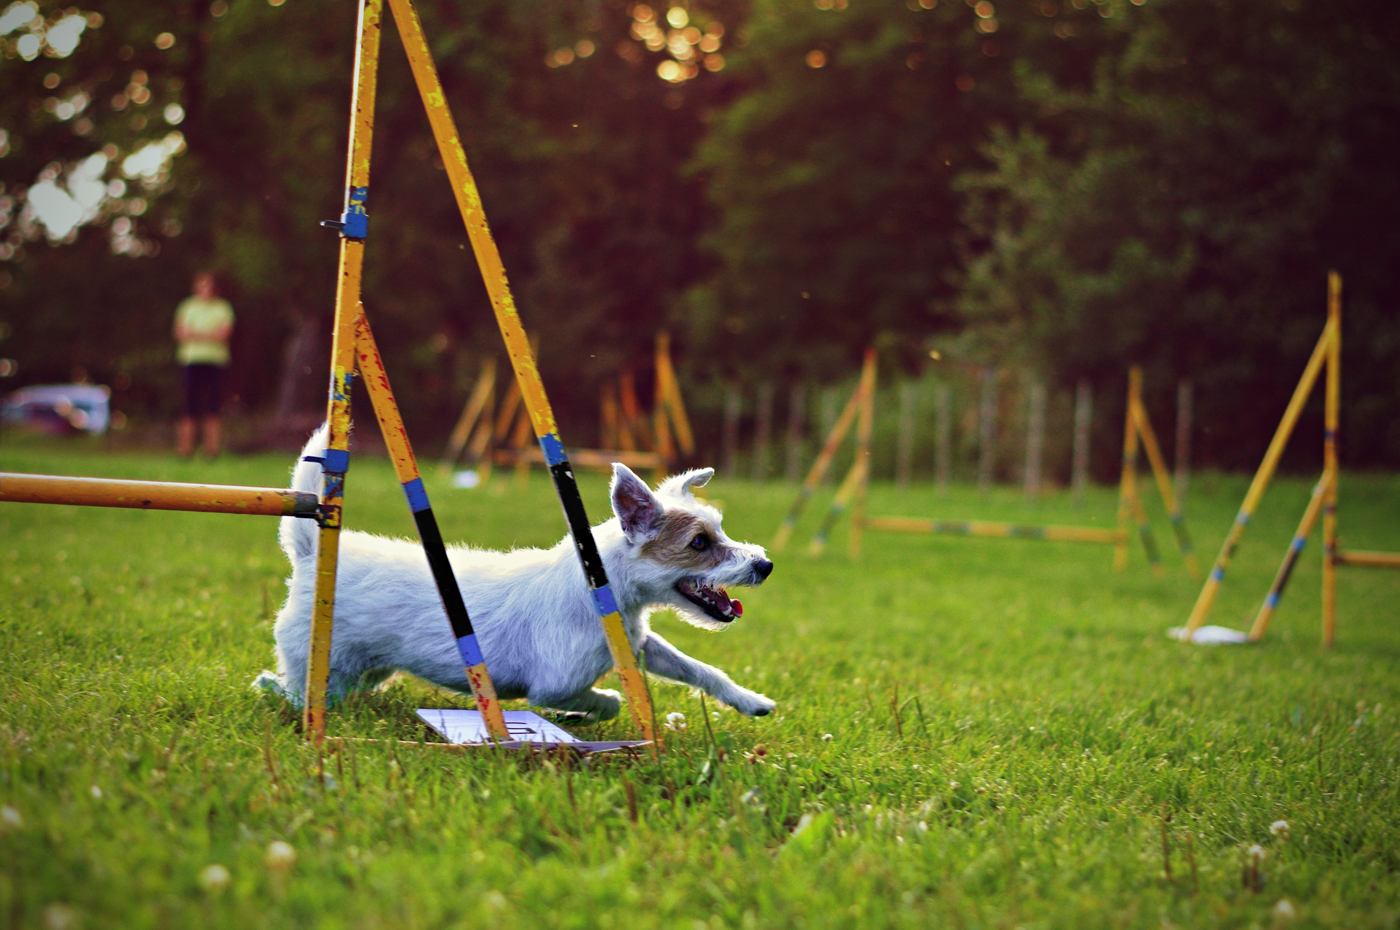 A small dog running around an agility training course